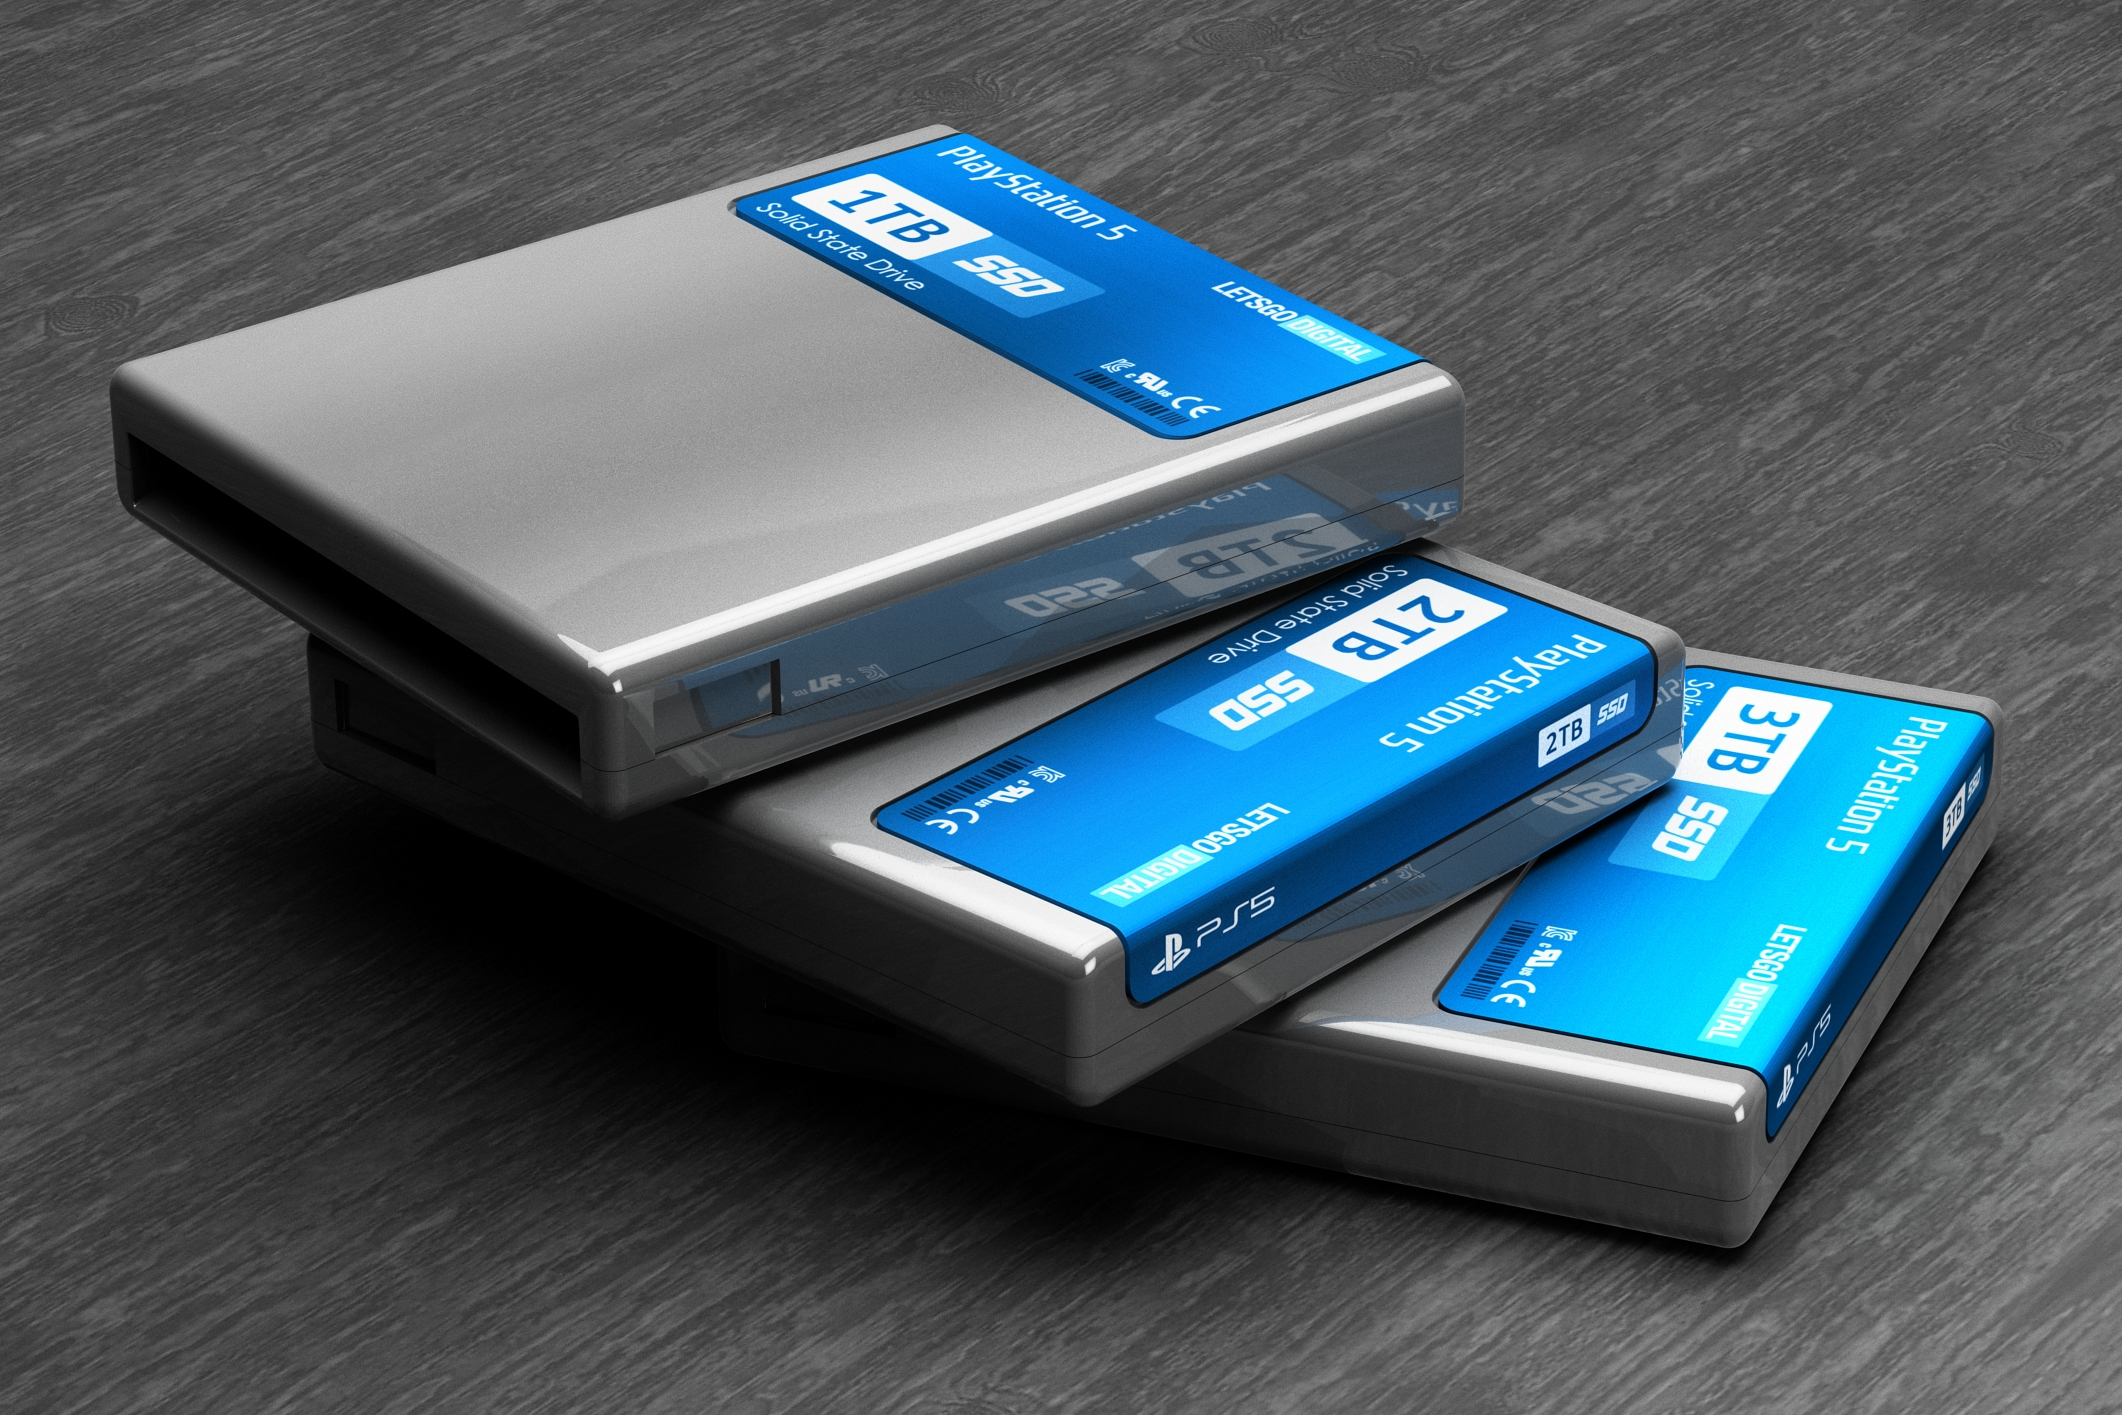 Sony's Cartridge Patent May Describe Custom SSD for the